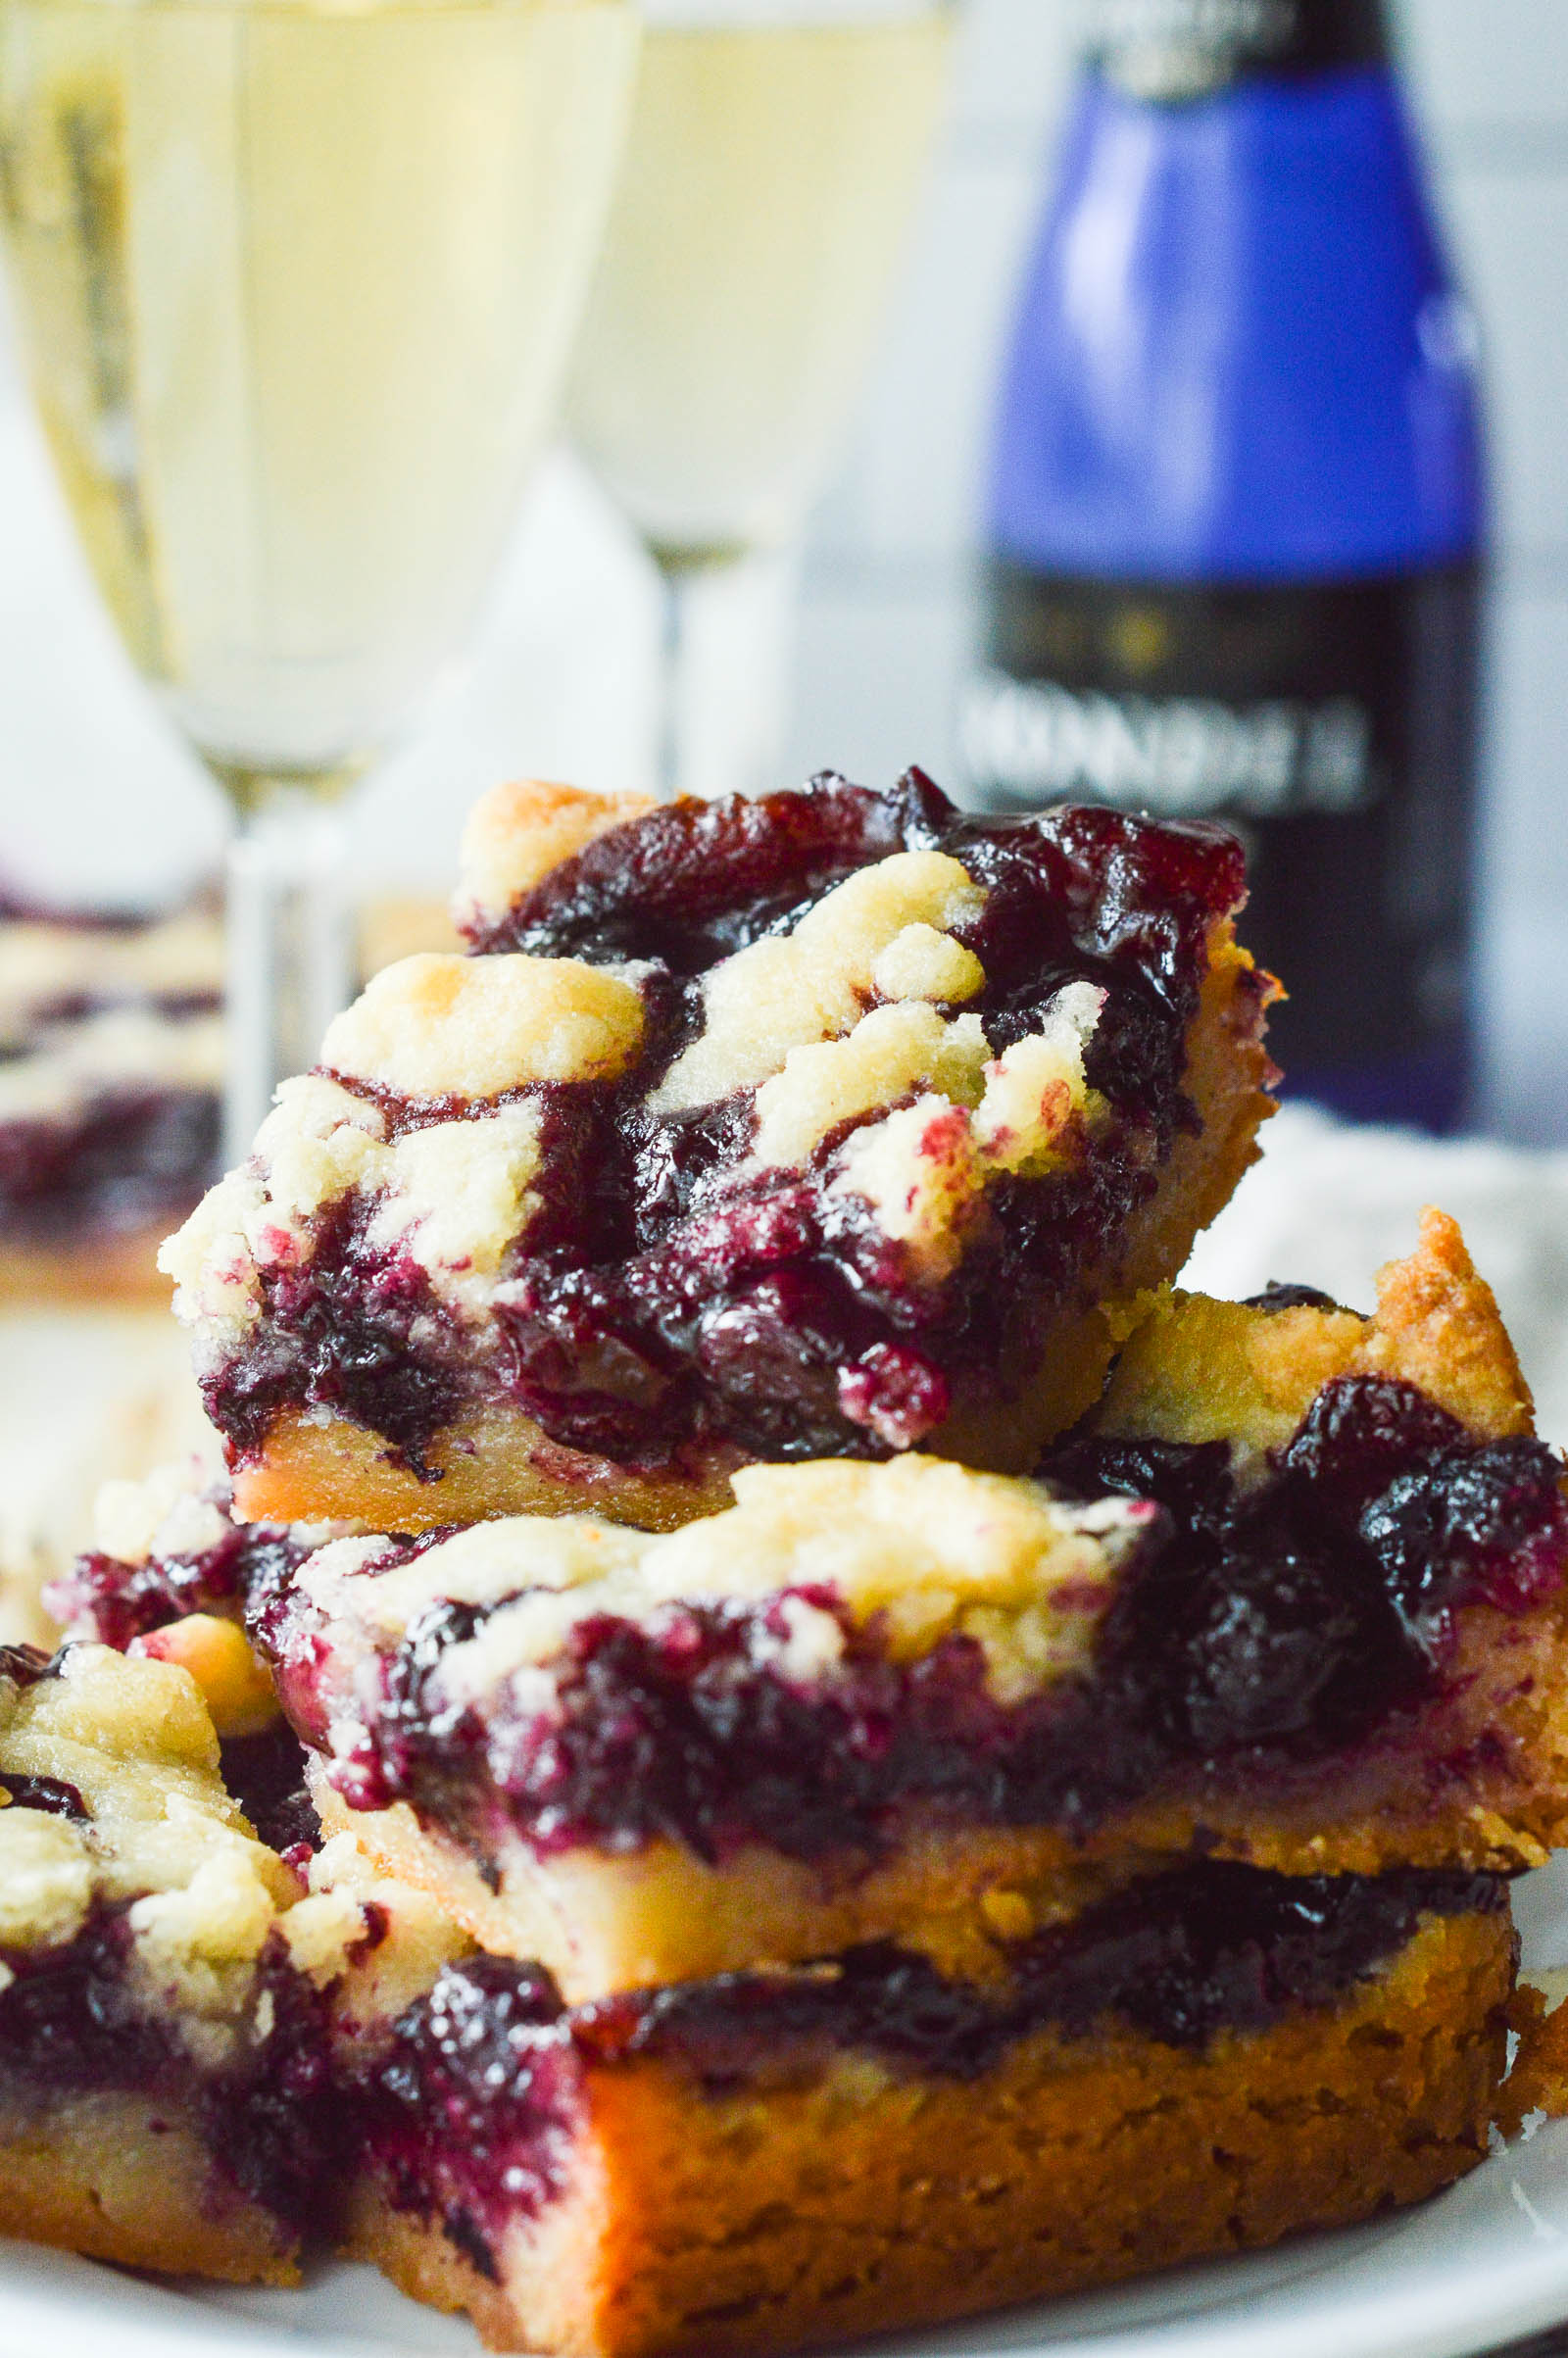 A stack of Blueberry Crumble Bars with several poured glassed of champagne in the background.